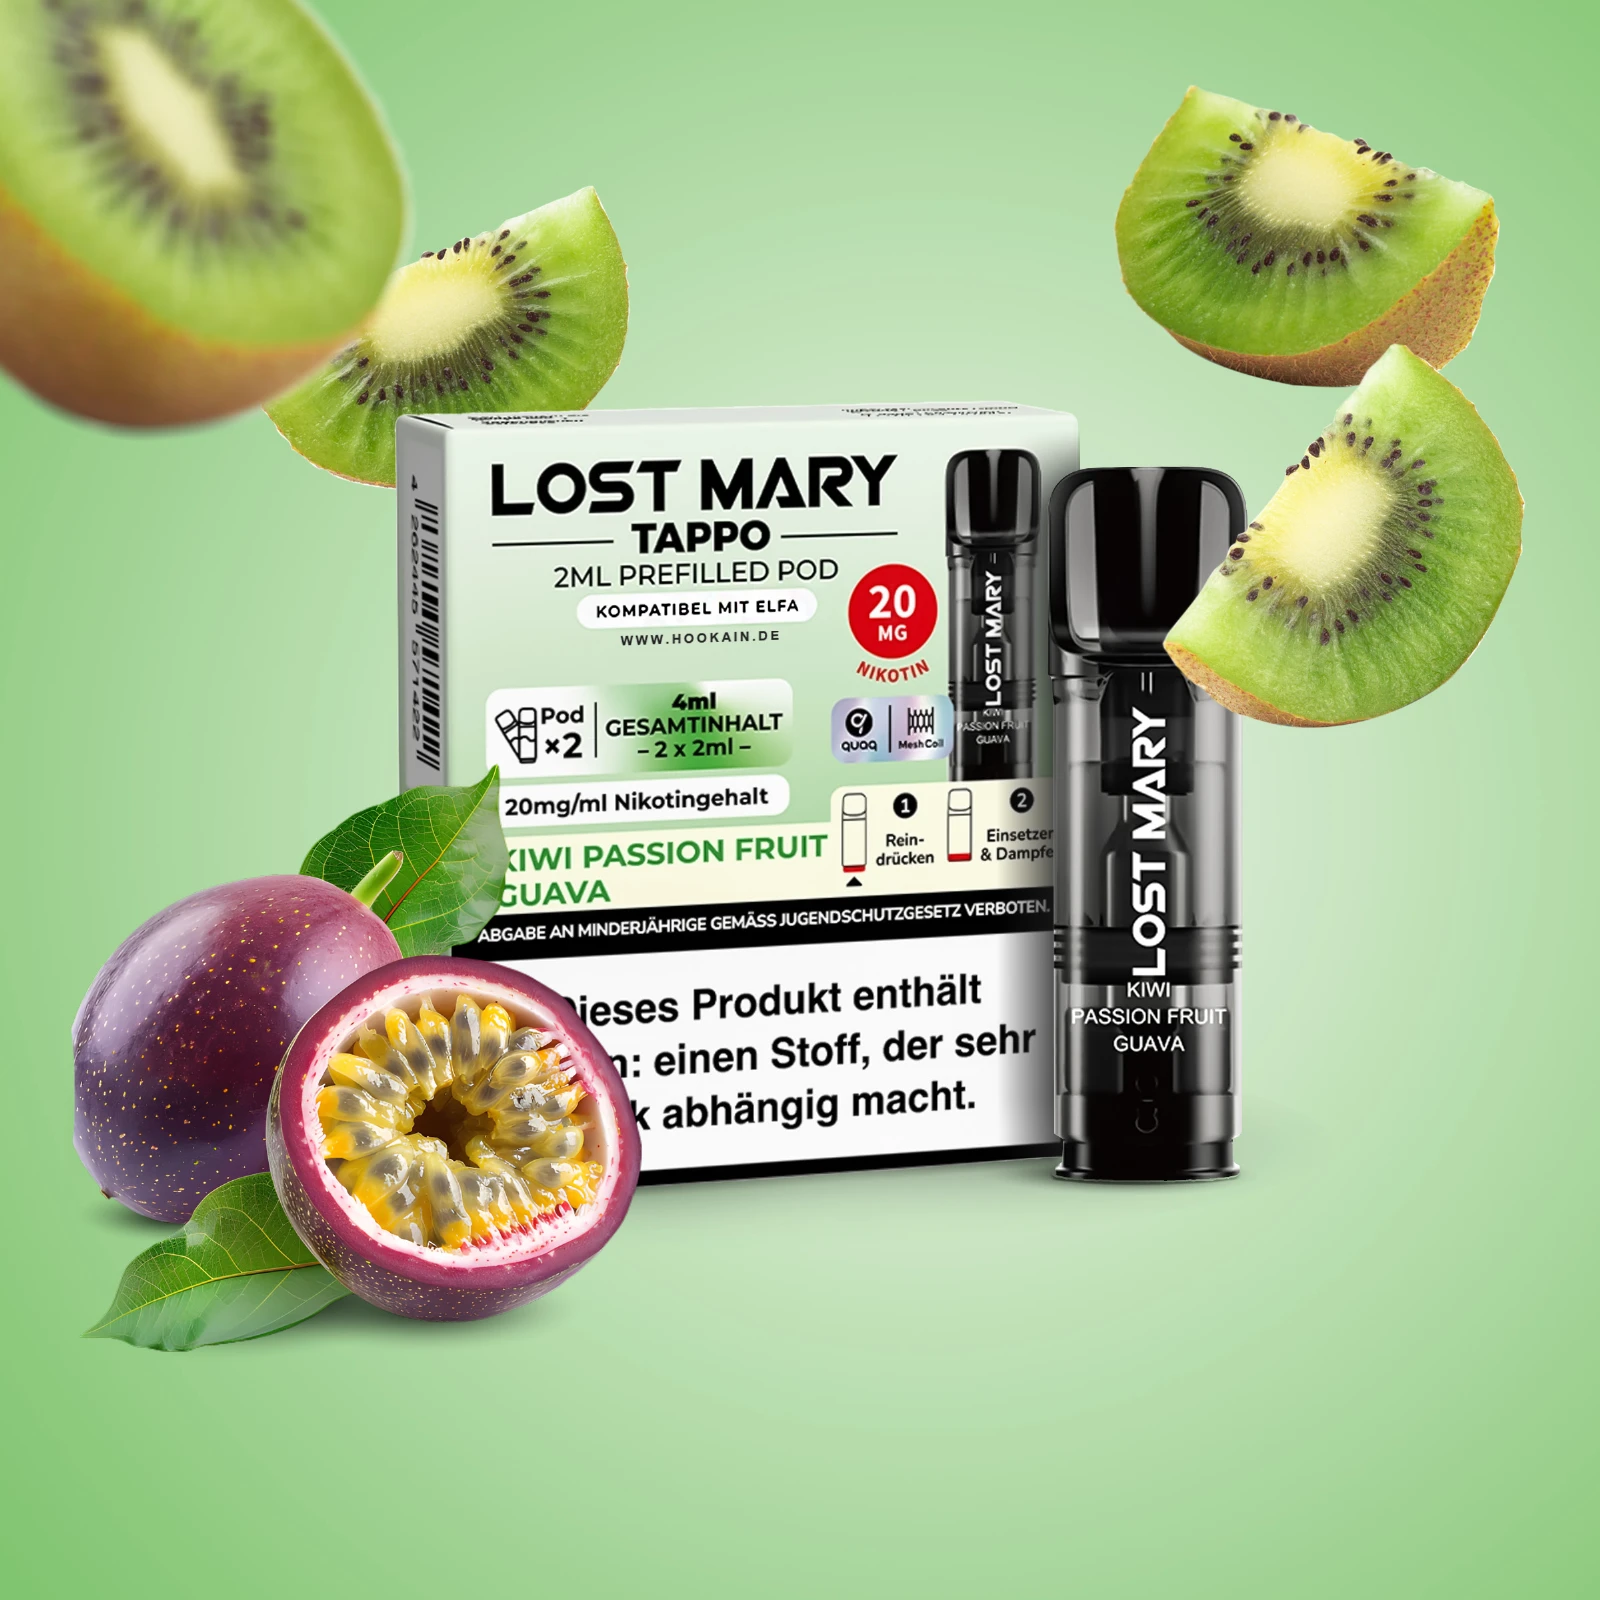 Lost Mary Tappo Kiwi Passionfruit Guava: Umweltfreundliches Pod-System mit Prefilled Pods